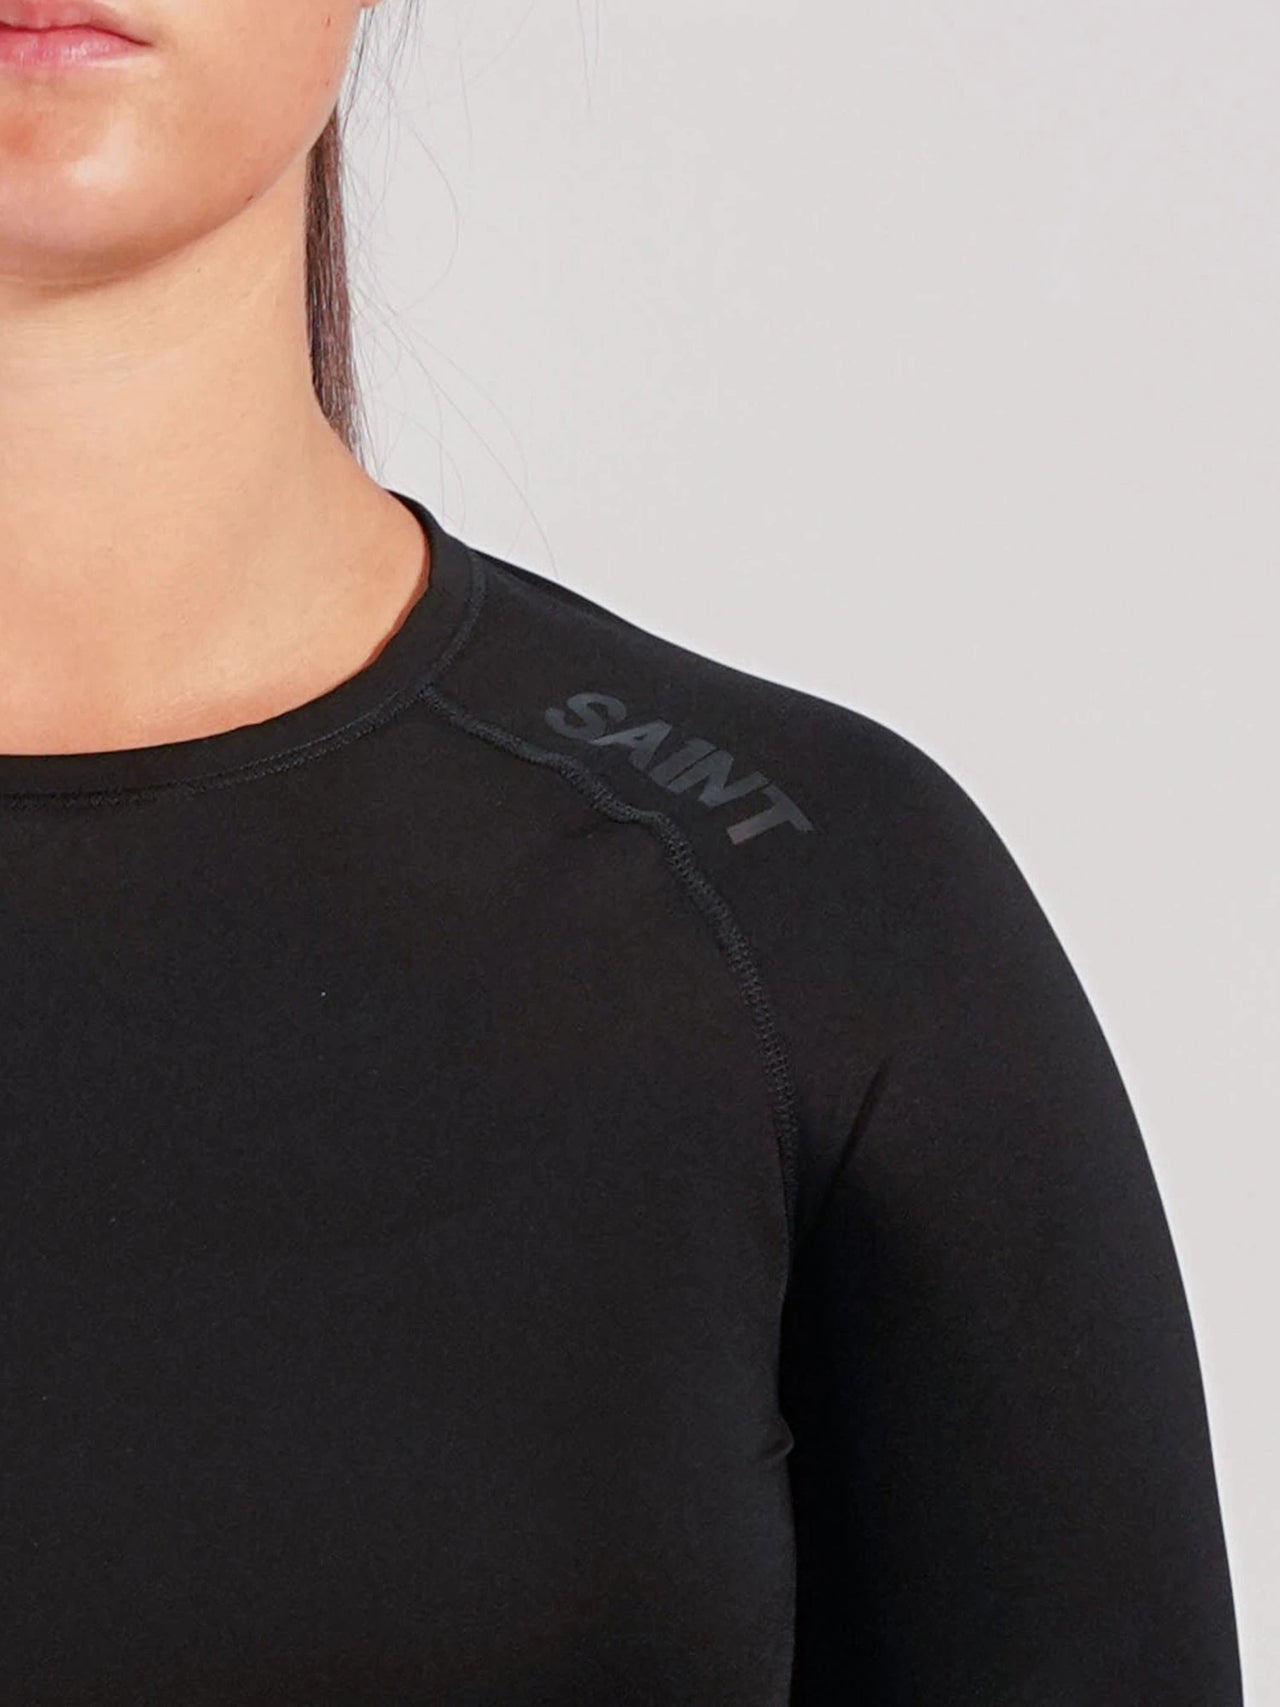 Women's Performance Compression Top